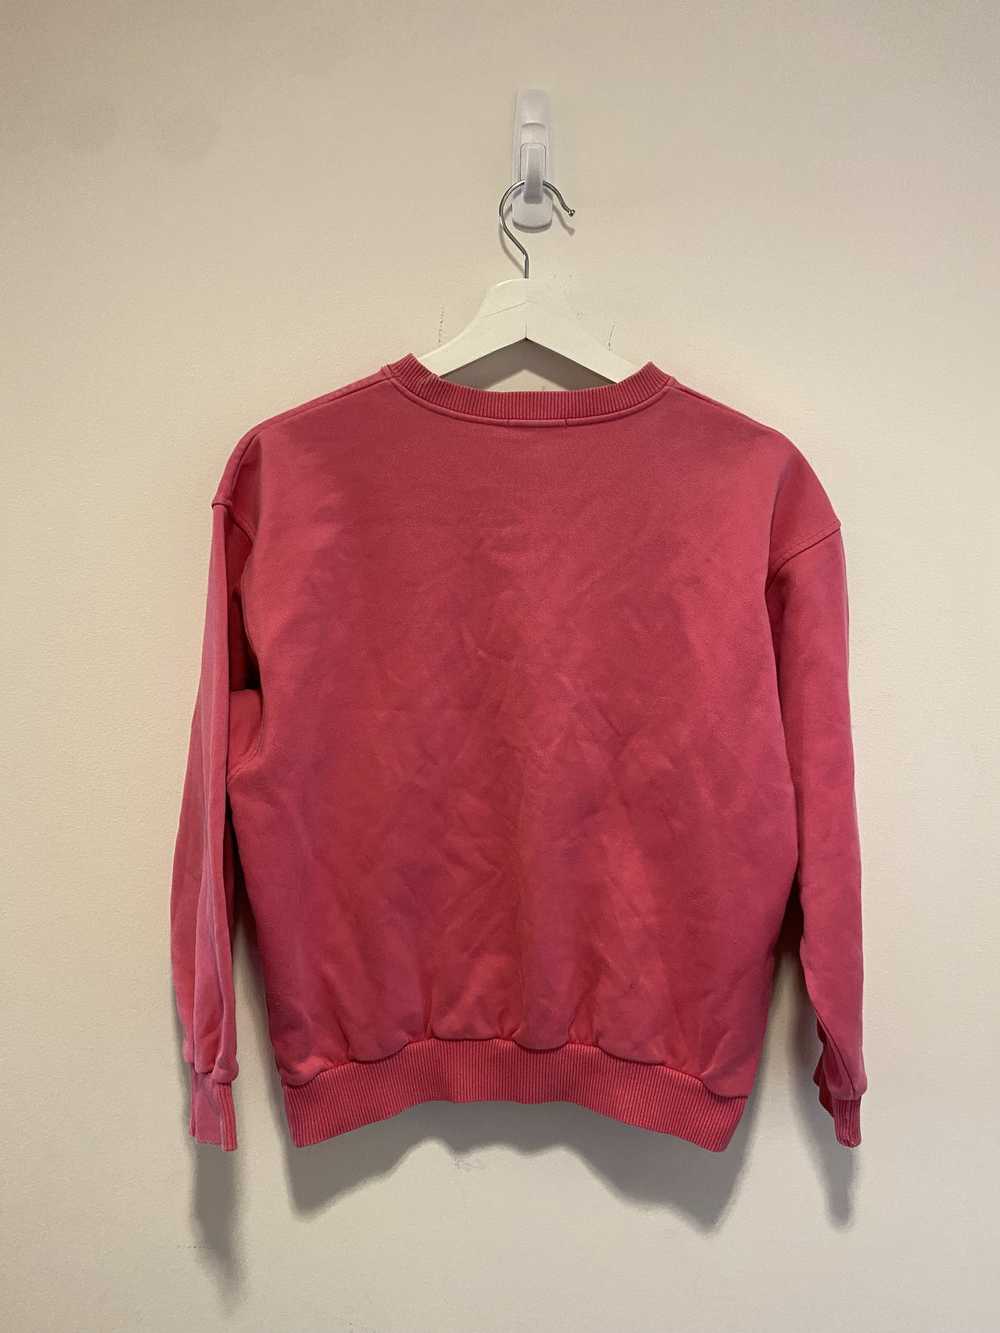 Courreges Courreges Puff Print Sweater - image 5